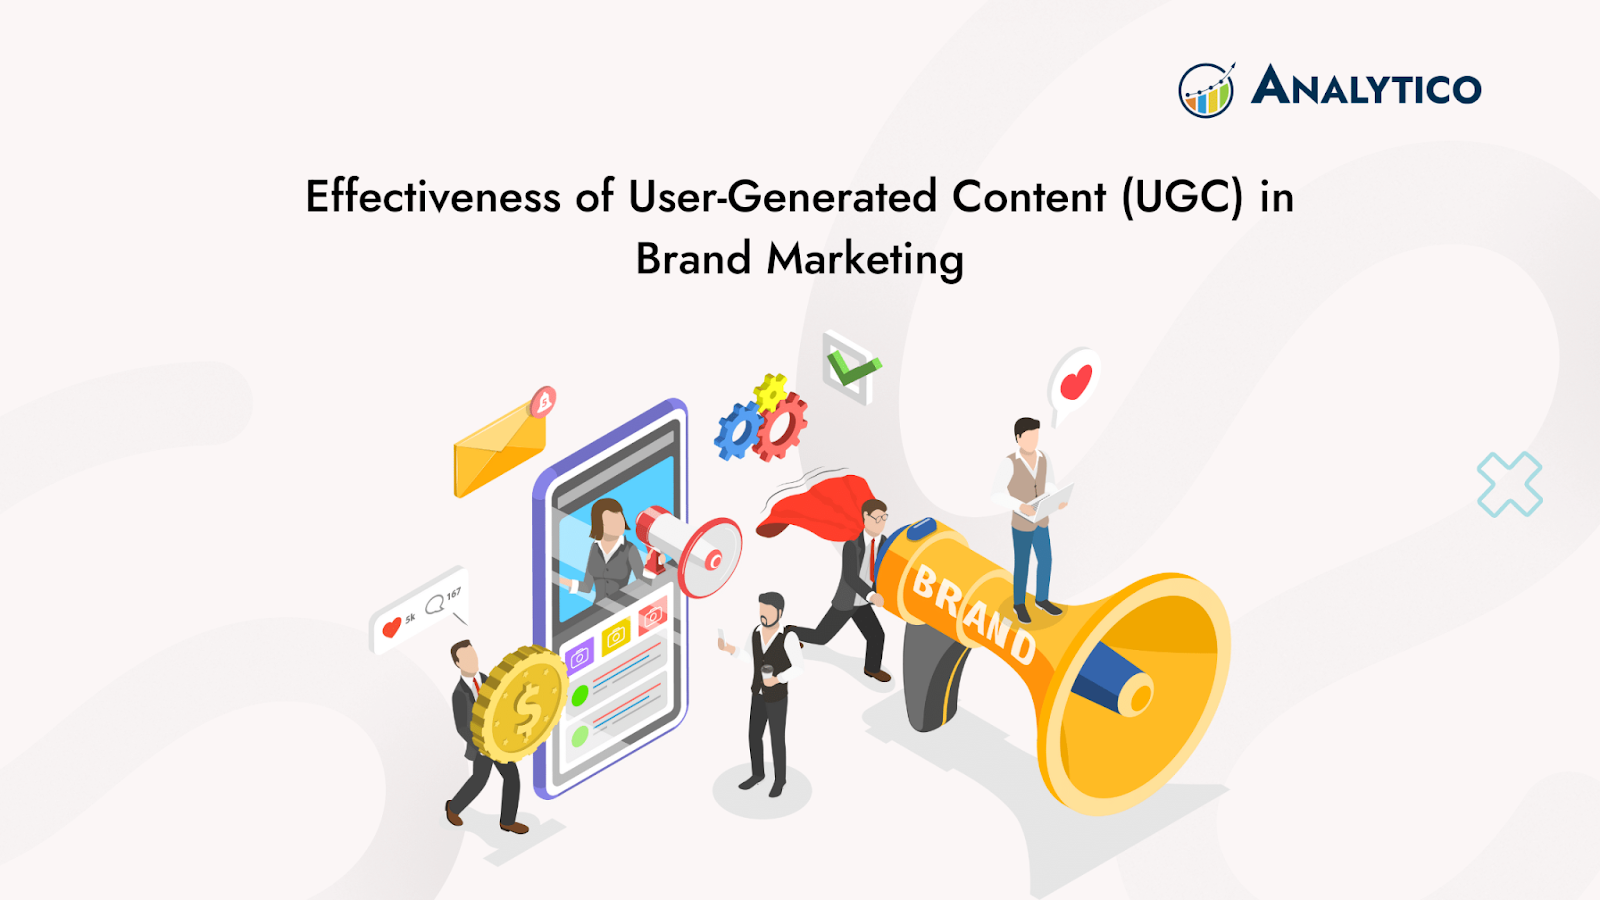  User-Generated Content (UGC) in Brand Marketing